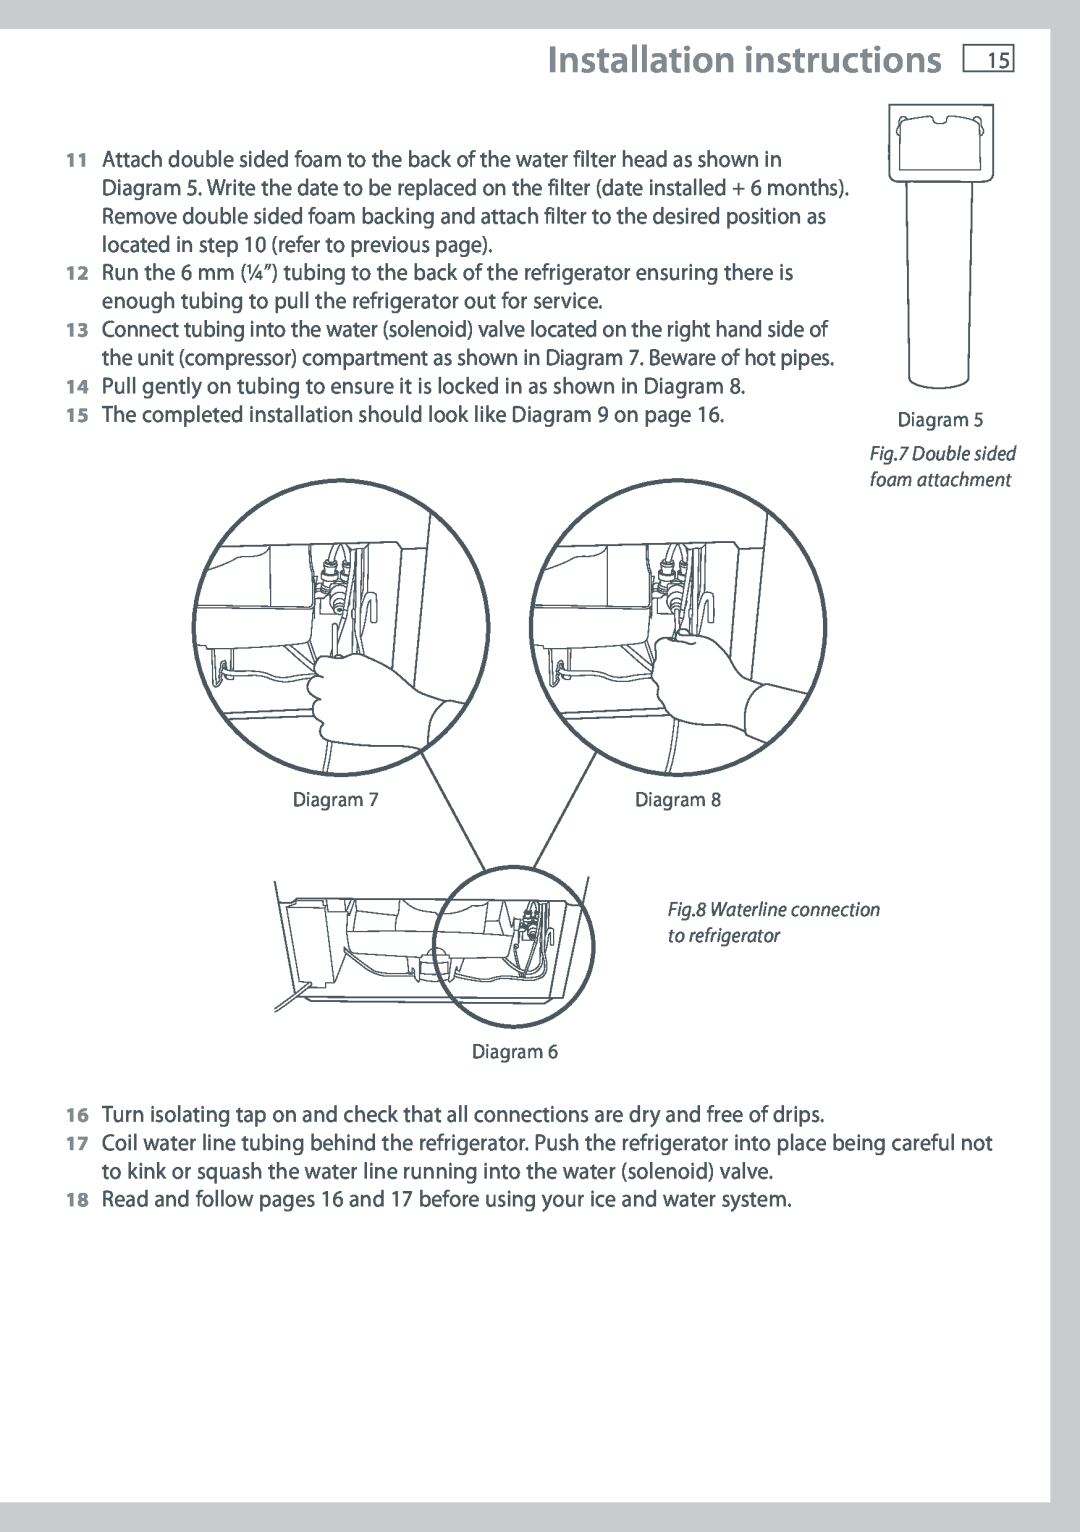 Fisher & Paykel RF610A Installation instructions, Pull gently on tubing to ensure it is locked in as shown in Diagram 